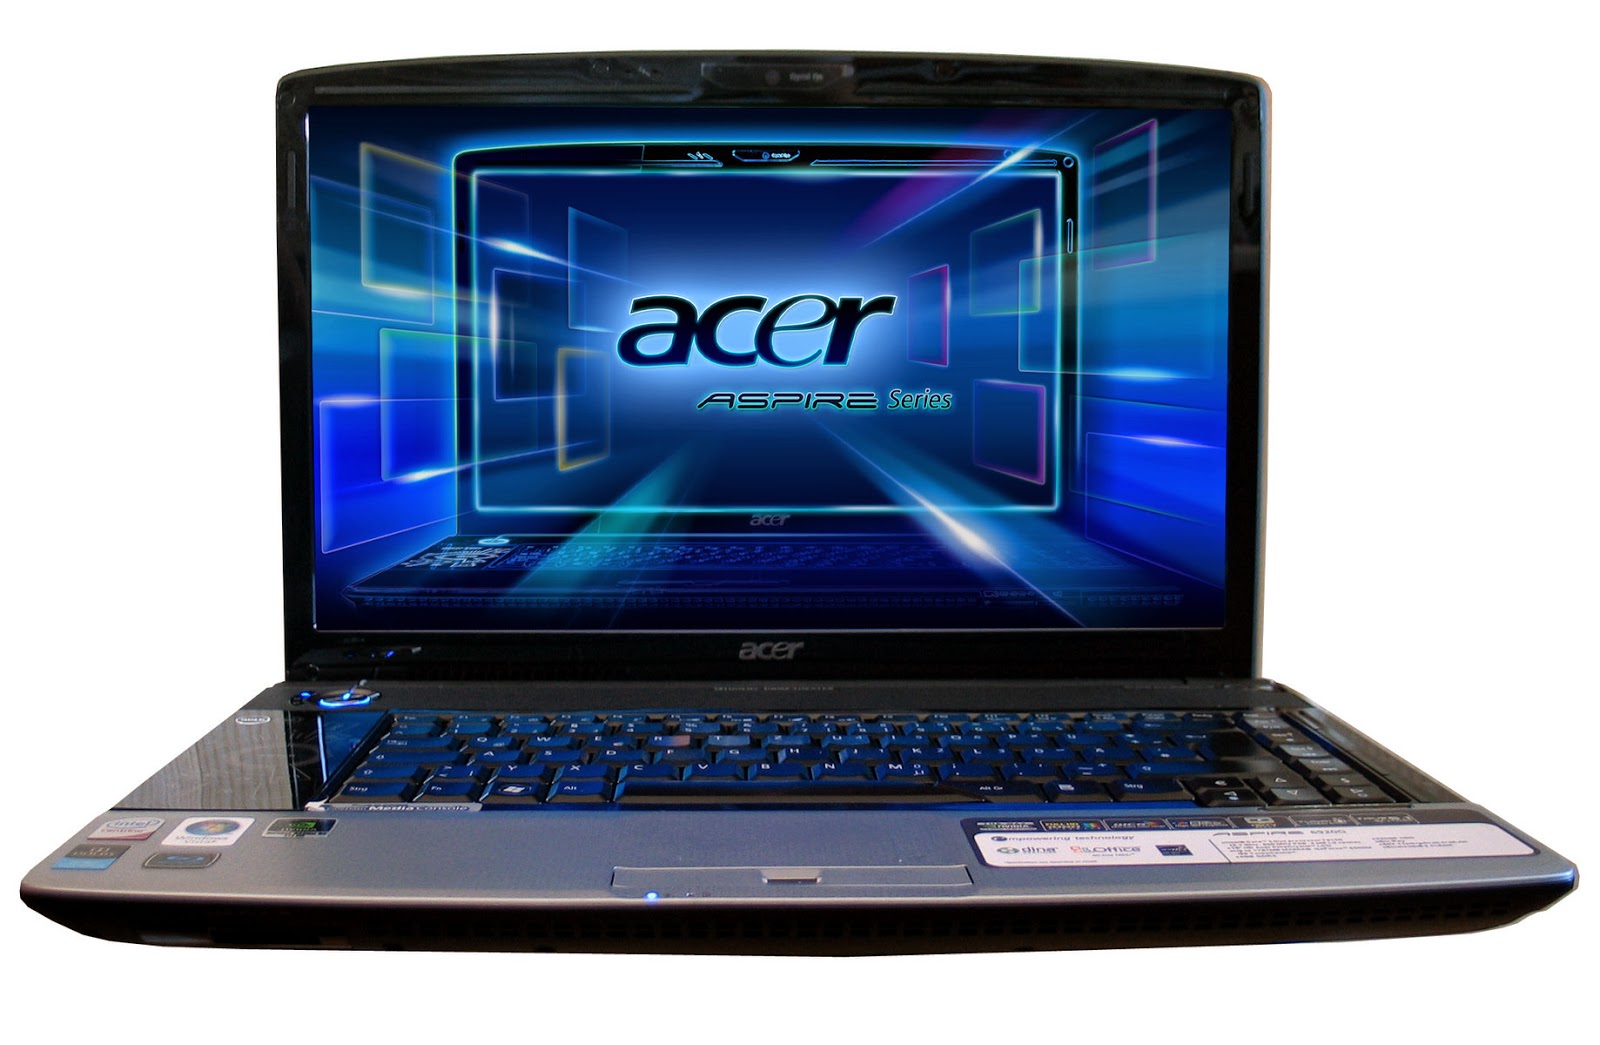 acer aspire one drivers free download for windows 7